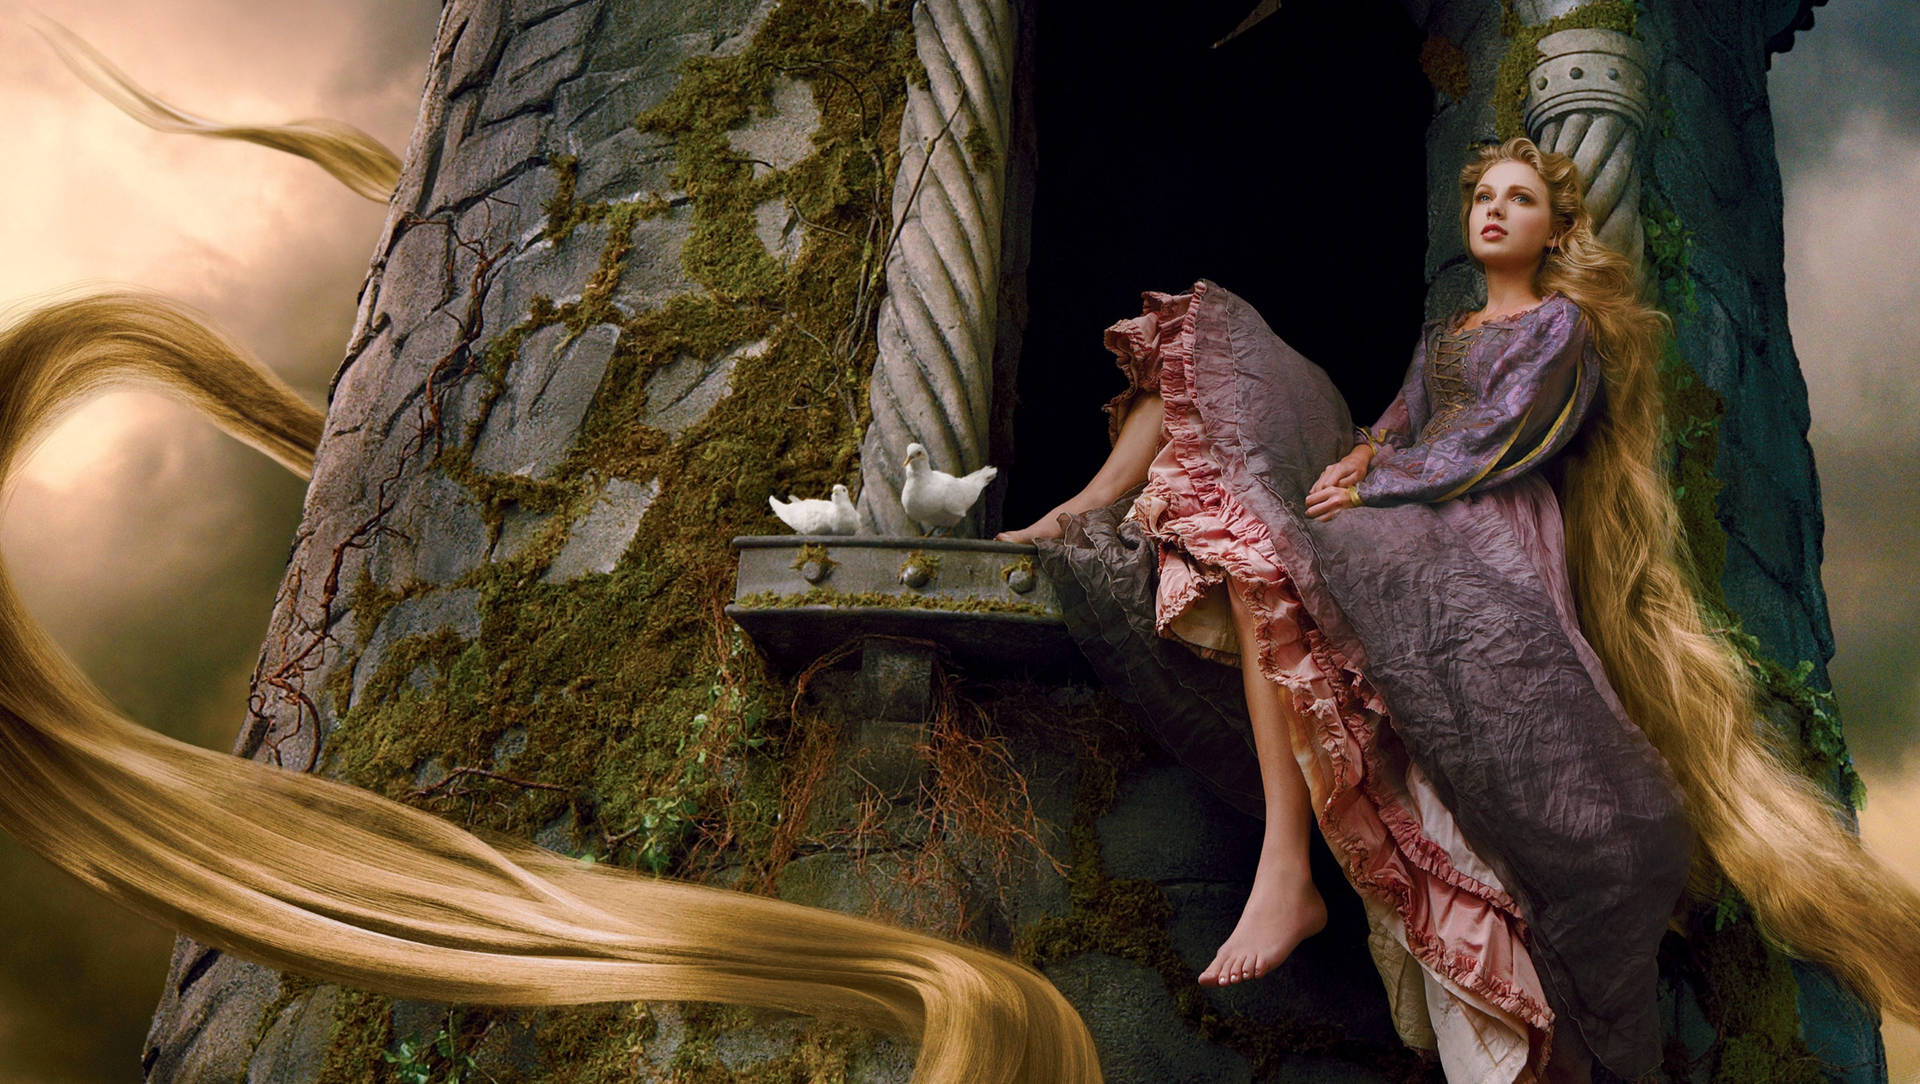 Taylor Swift stuns in the role of Rapunzel Wallpaper